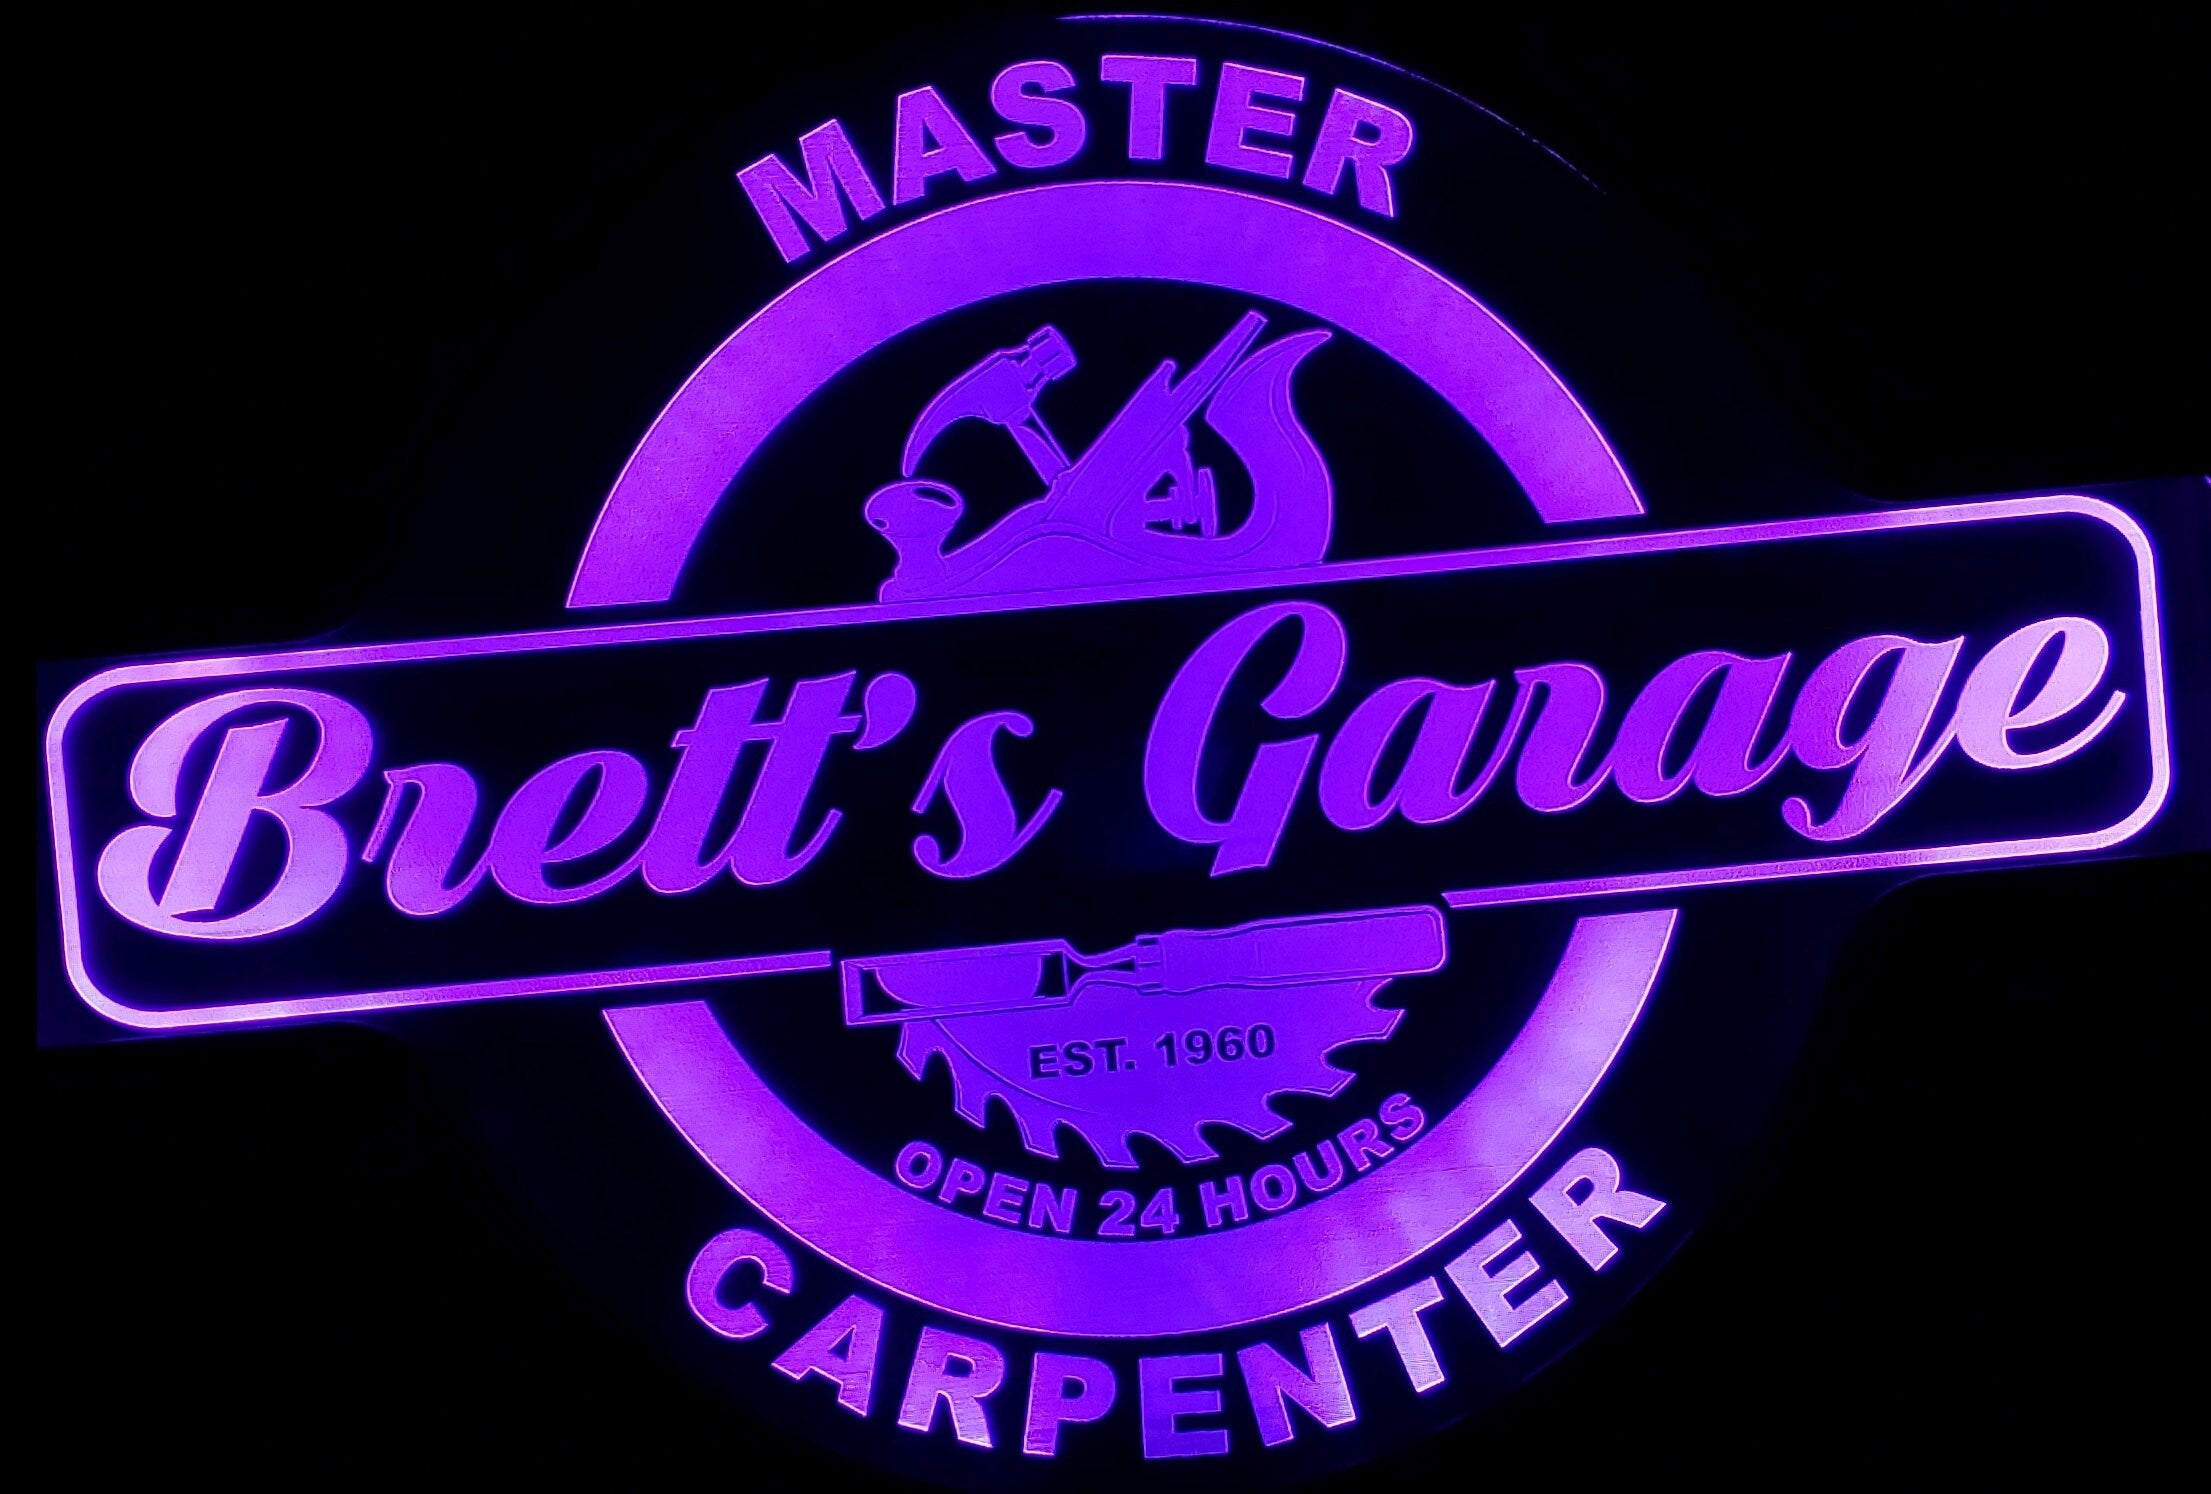 Custom Master Carpenter Led Wall Sign Neon Like - Color Changing Remote Control - 4 Sizes Free Shipping